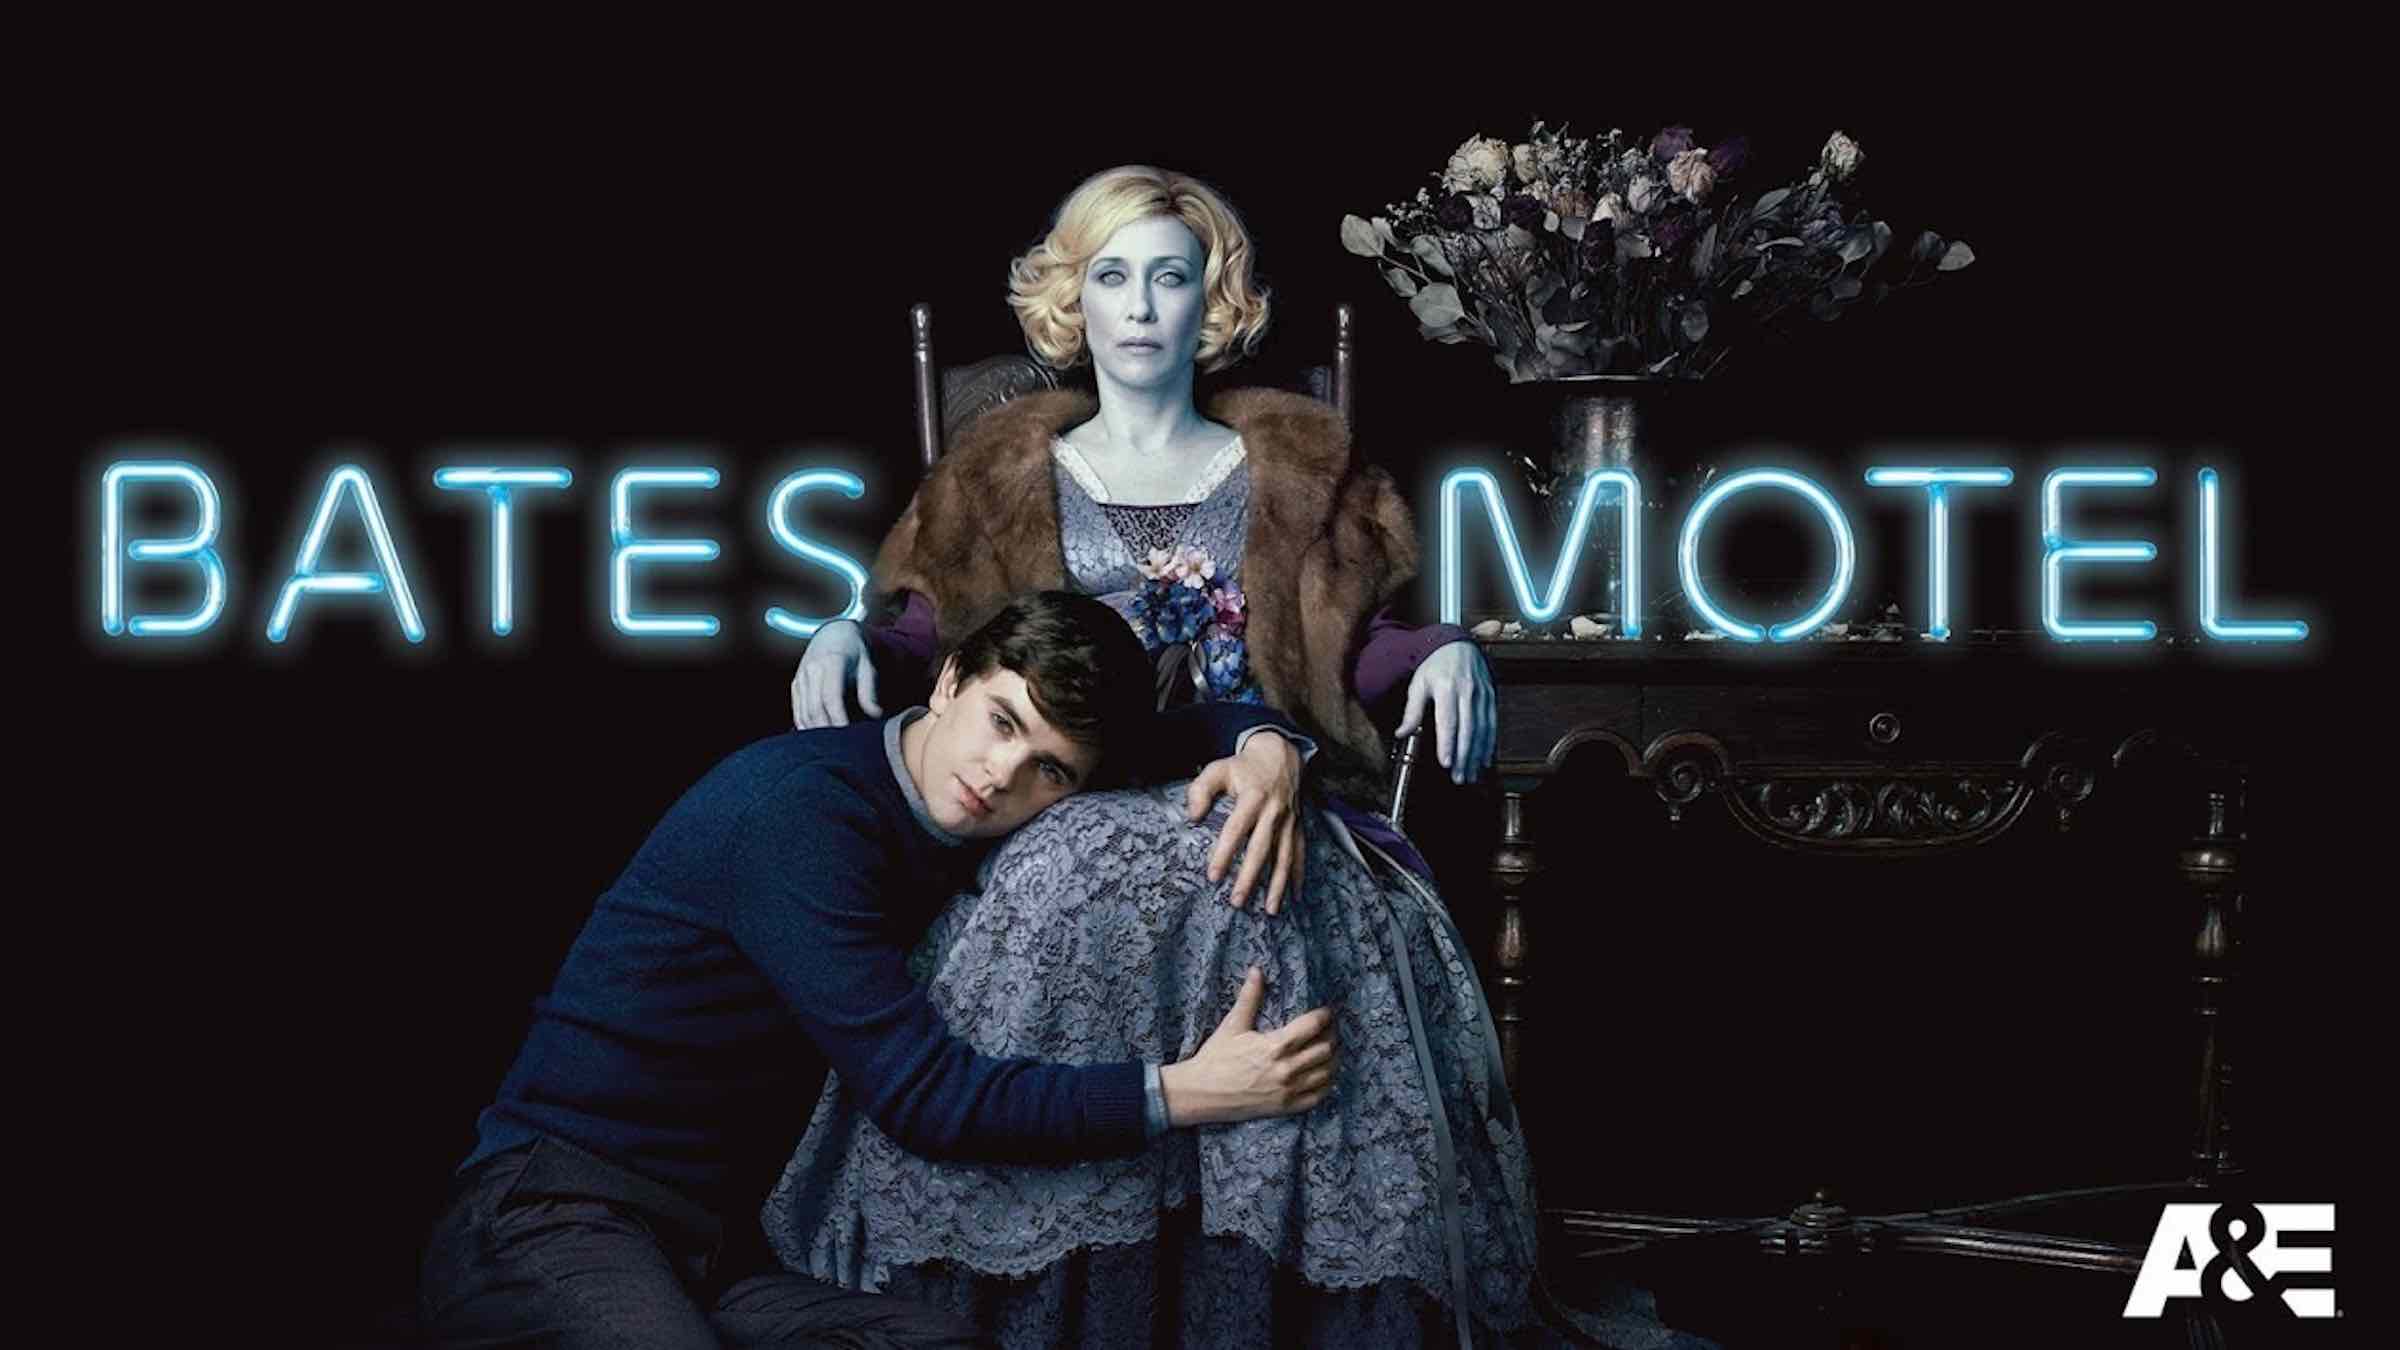 Lock your doors, close your curtains, and take our 'Bates Motel' quiz. See if you have what it takes to defeat the infamous Norman Bates.